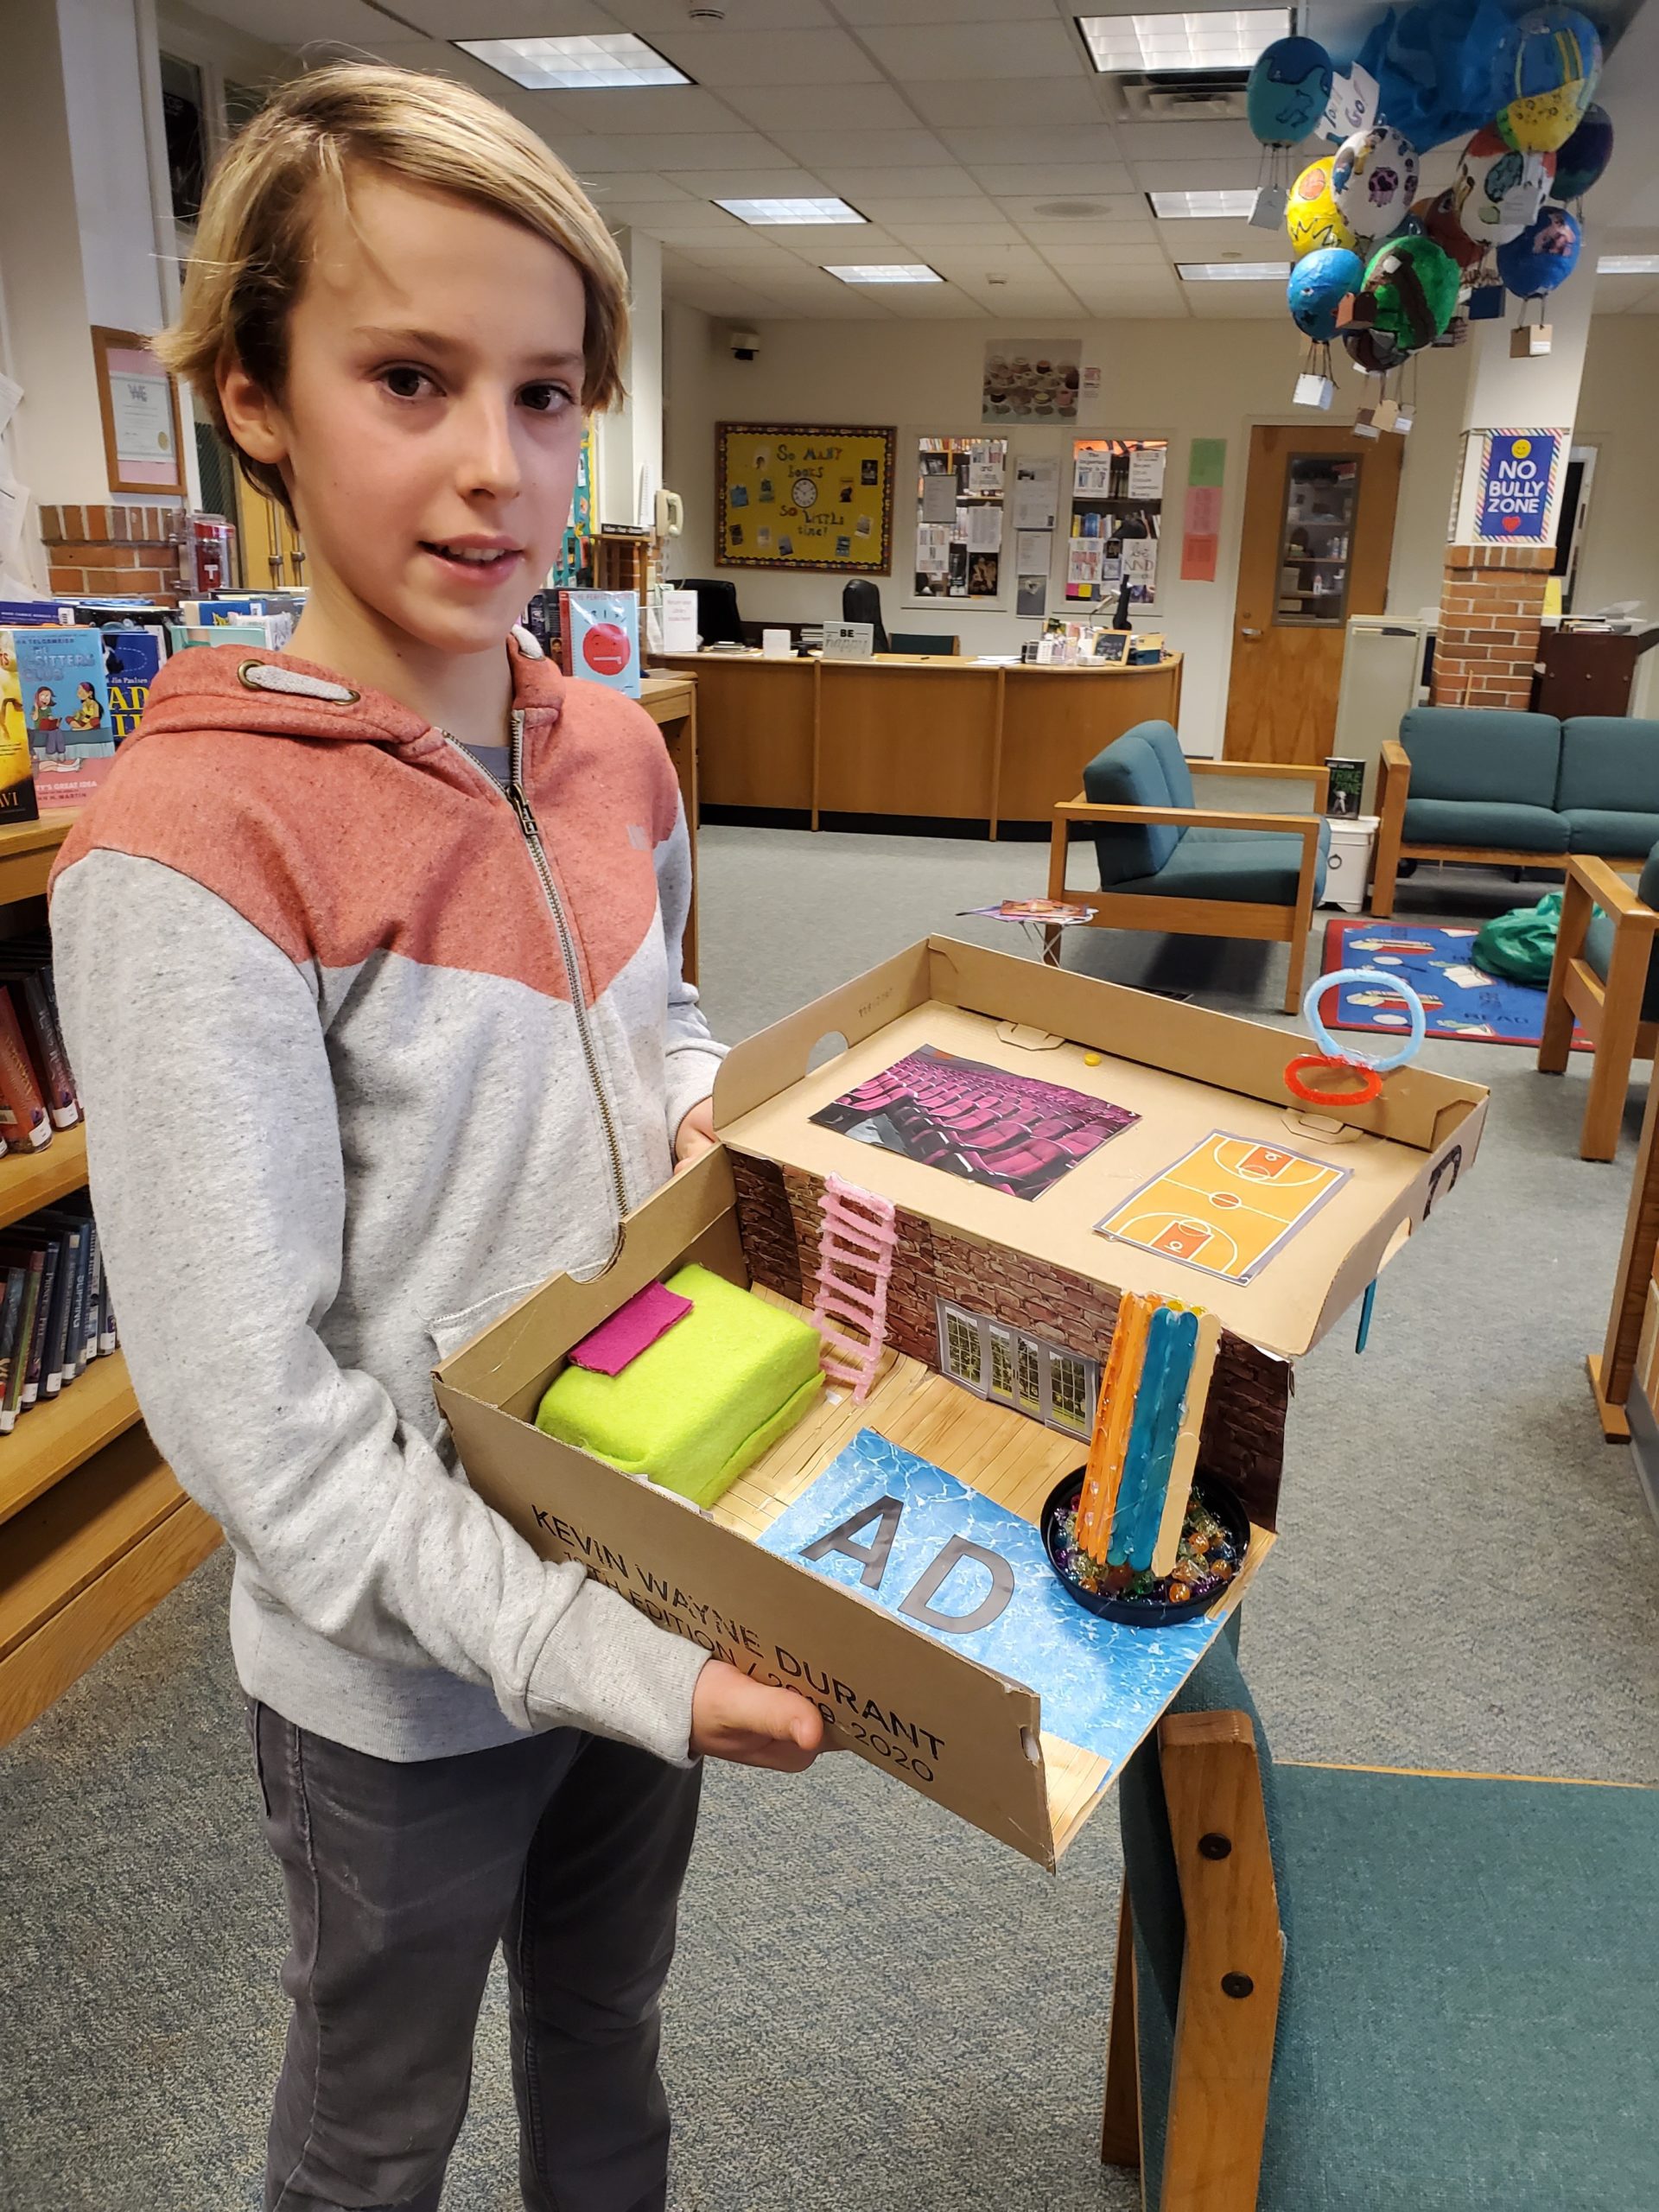 Westhampton Beach Middle School student Adrien Dellaert shows of his design, the result of a project in which students were asked to create their dream bedroom inside a shoebox.